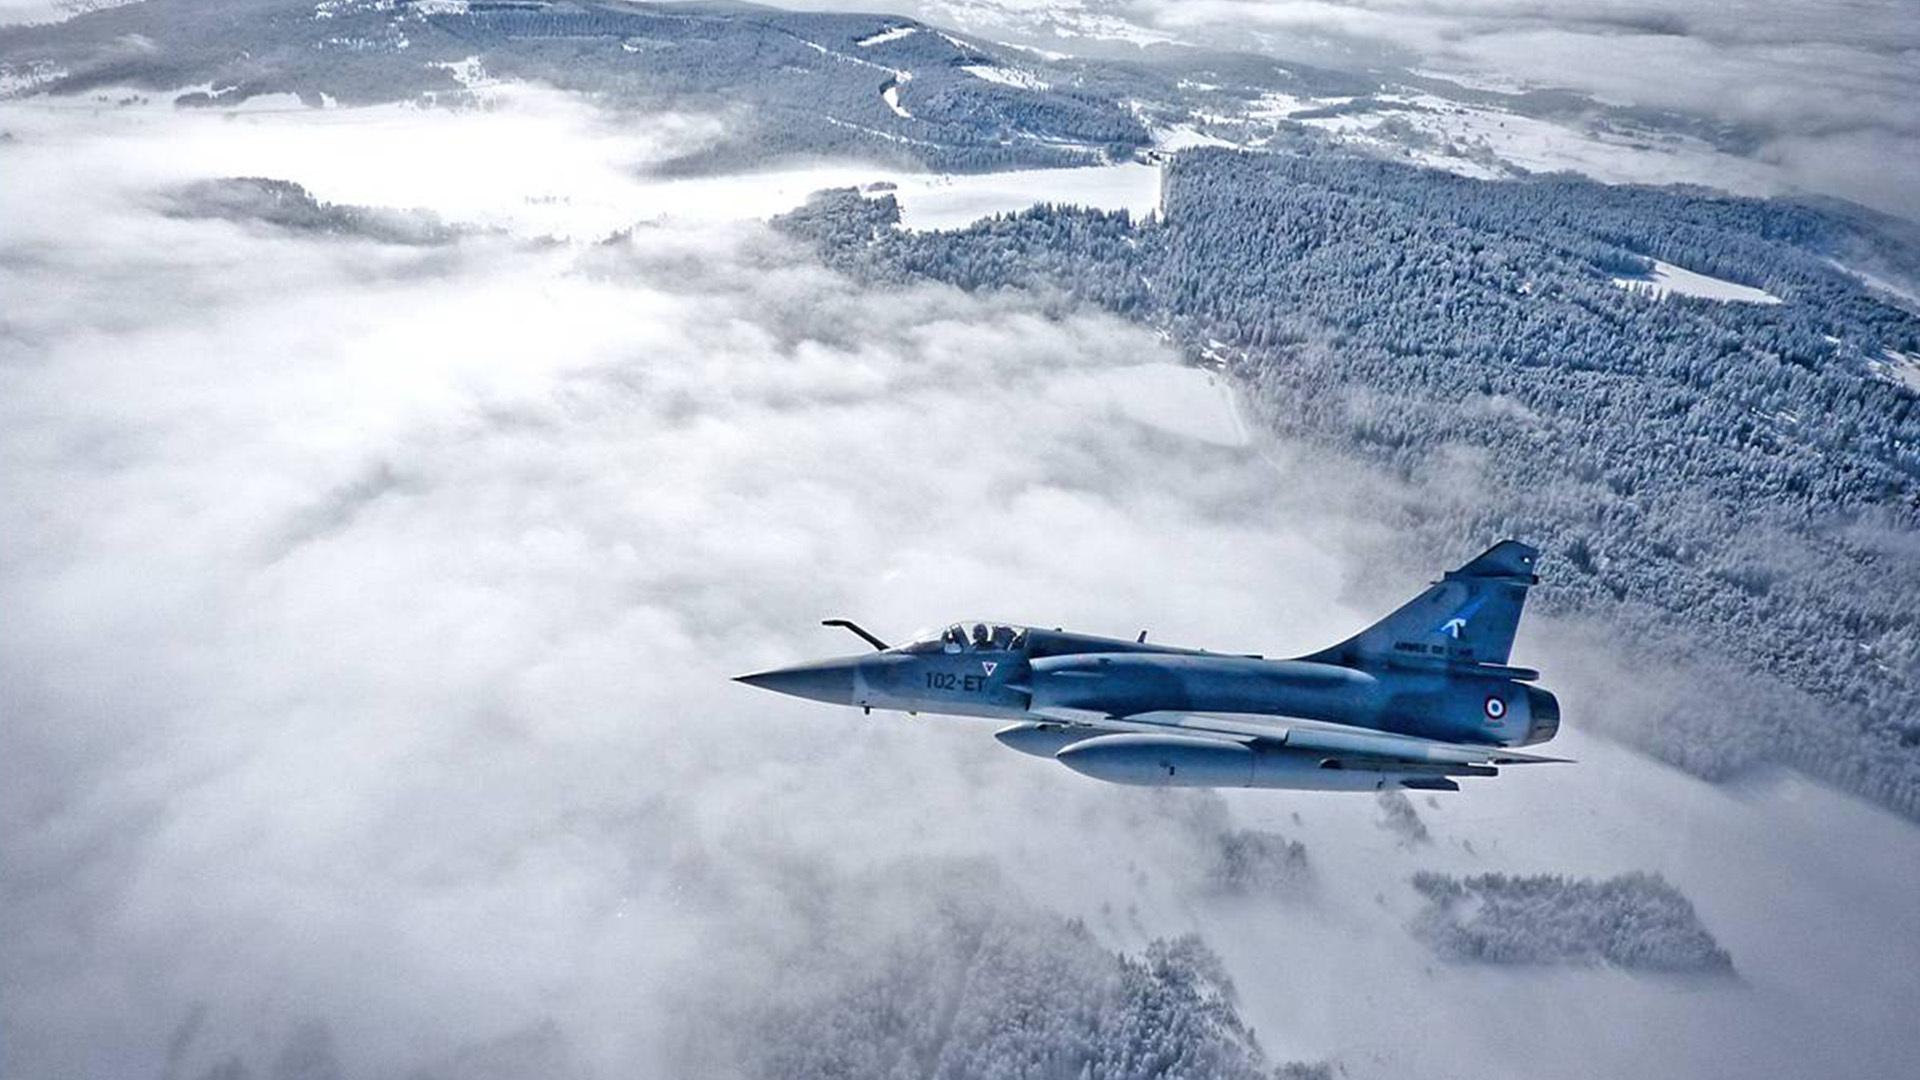 French mirage fighter plane over forest in winter -